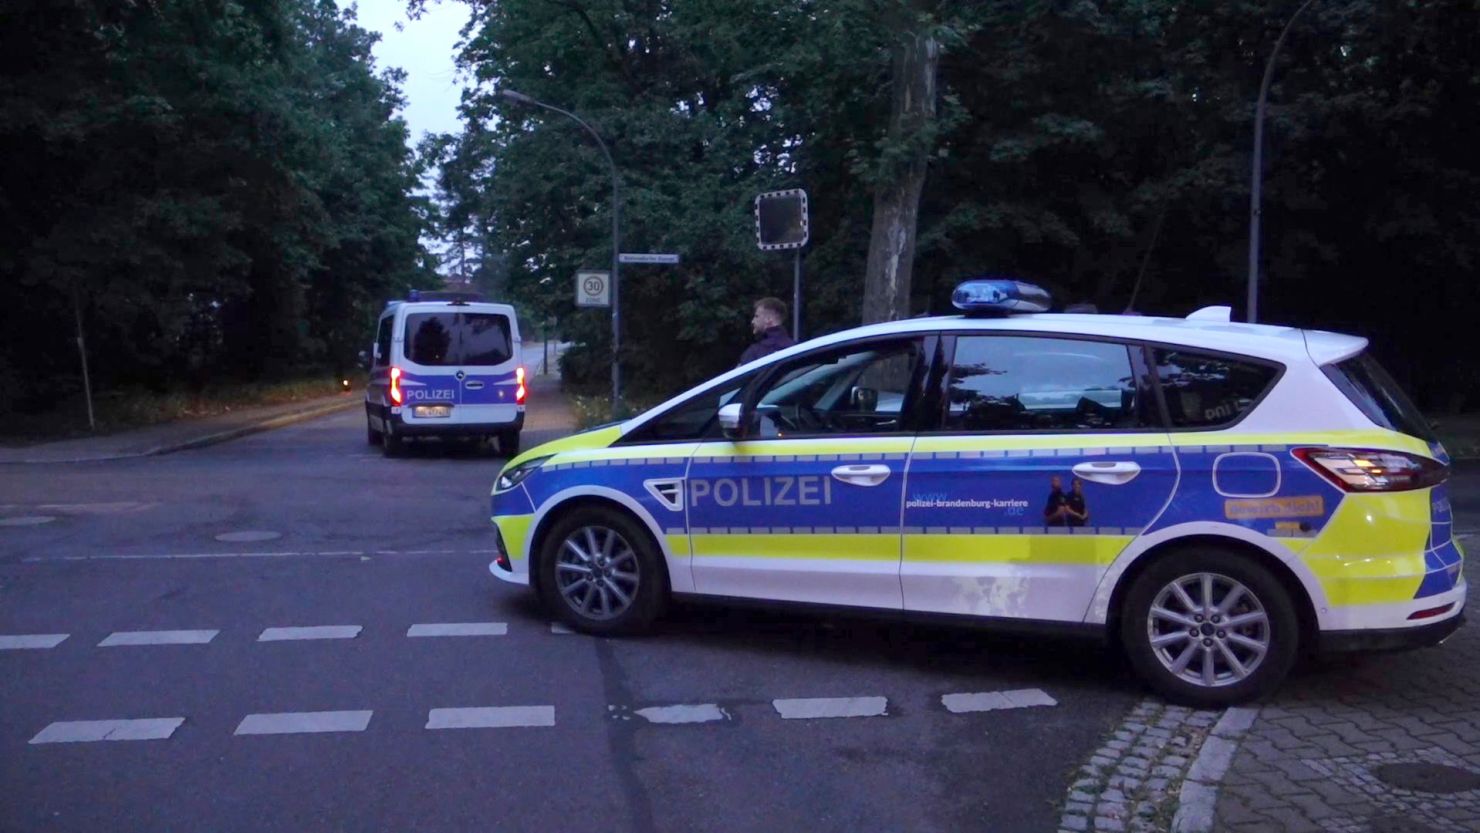 German police are searching for a dangerous wild animal on the loose in the southwestern part of Berlin. 